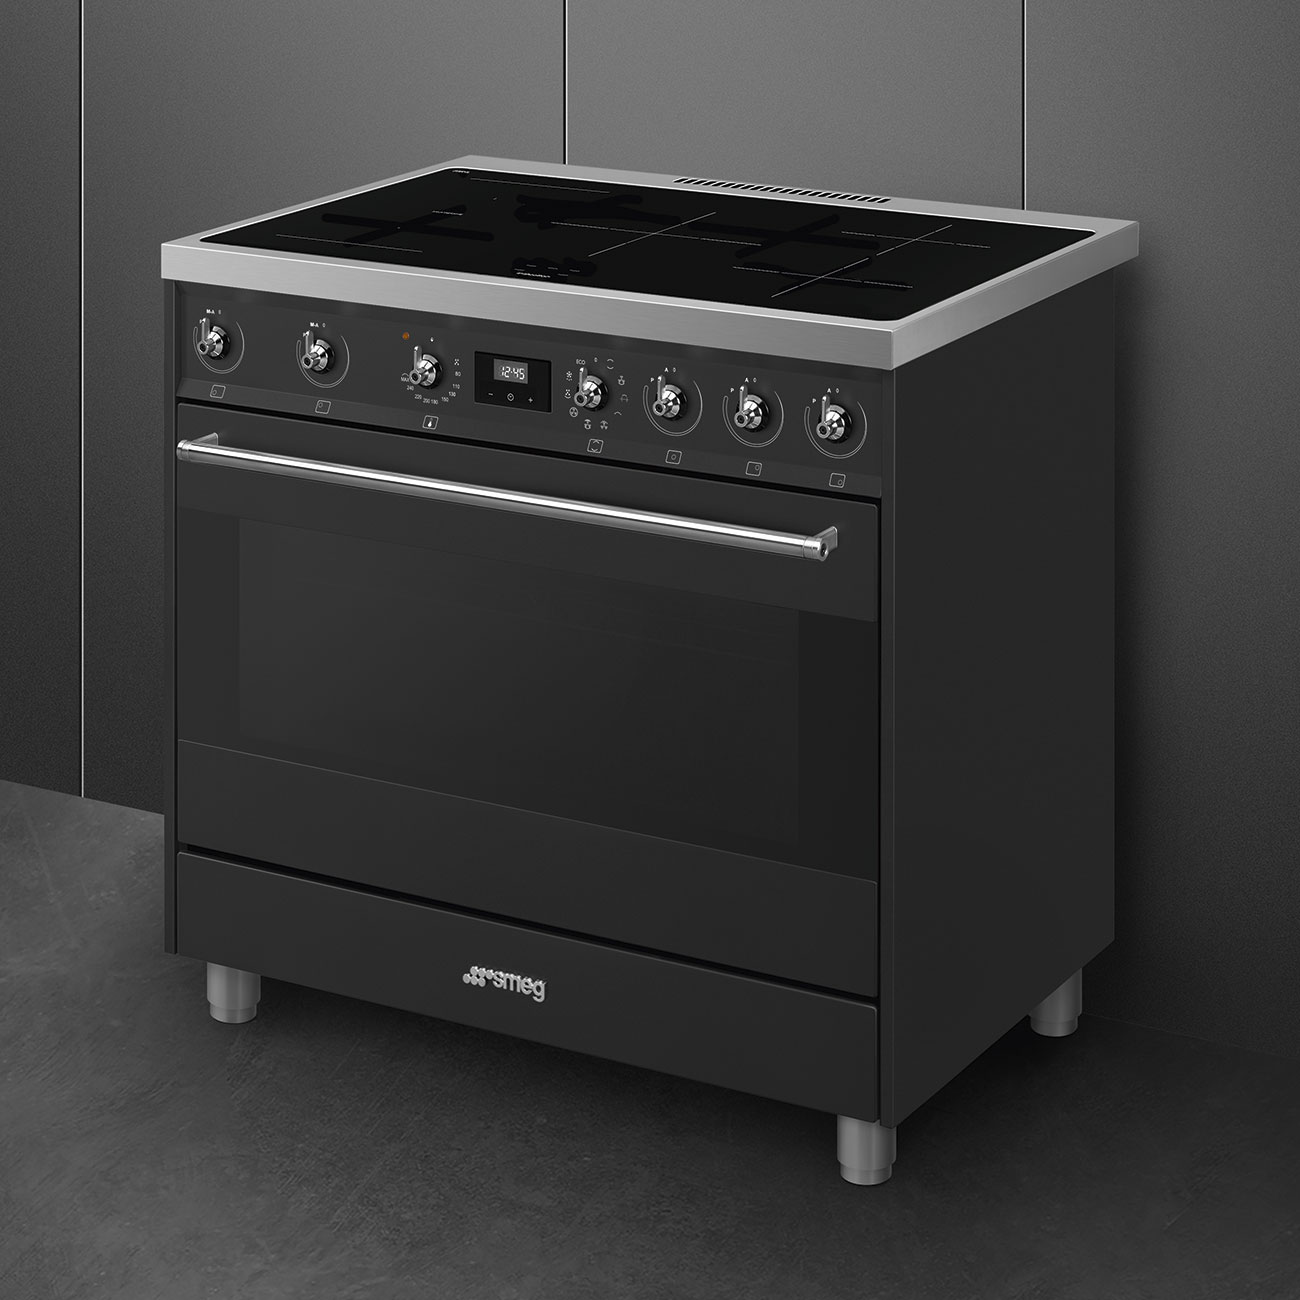 Smeg Anthracite Cooker with Induction Hob_3